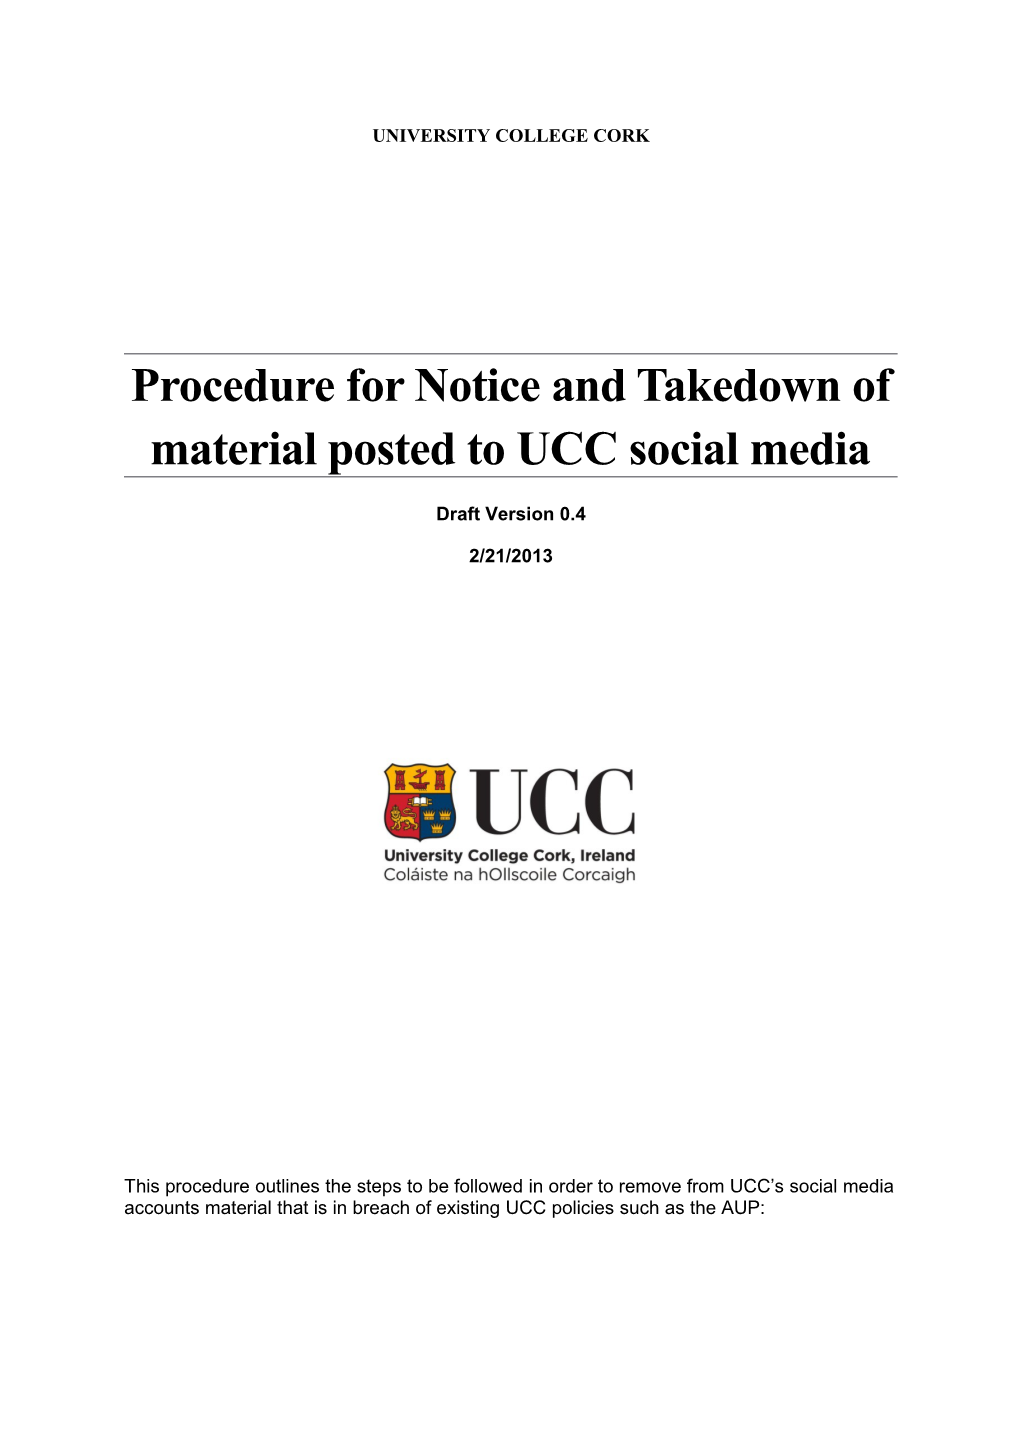 Procedure for Notice and Takedown of Material Posted to UCC Social Media